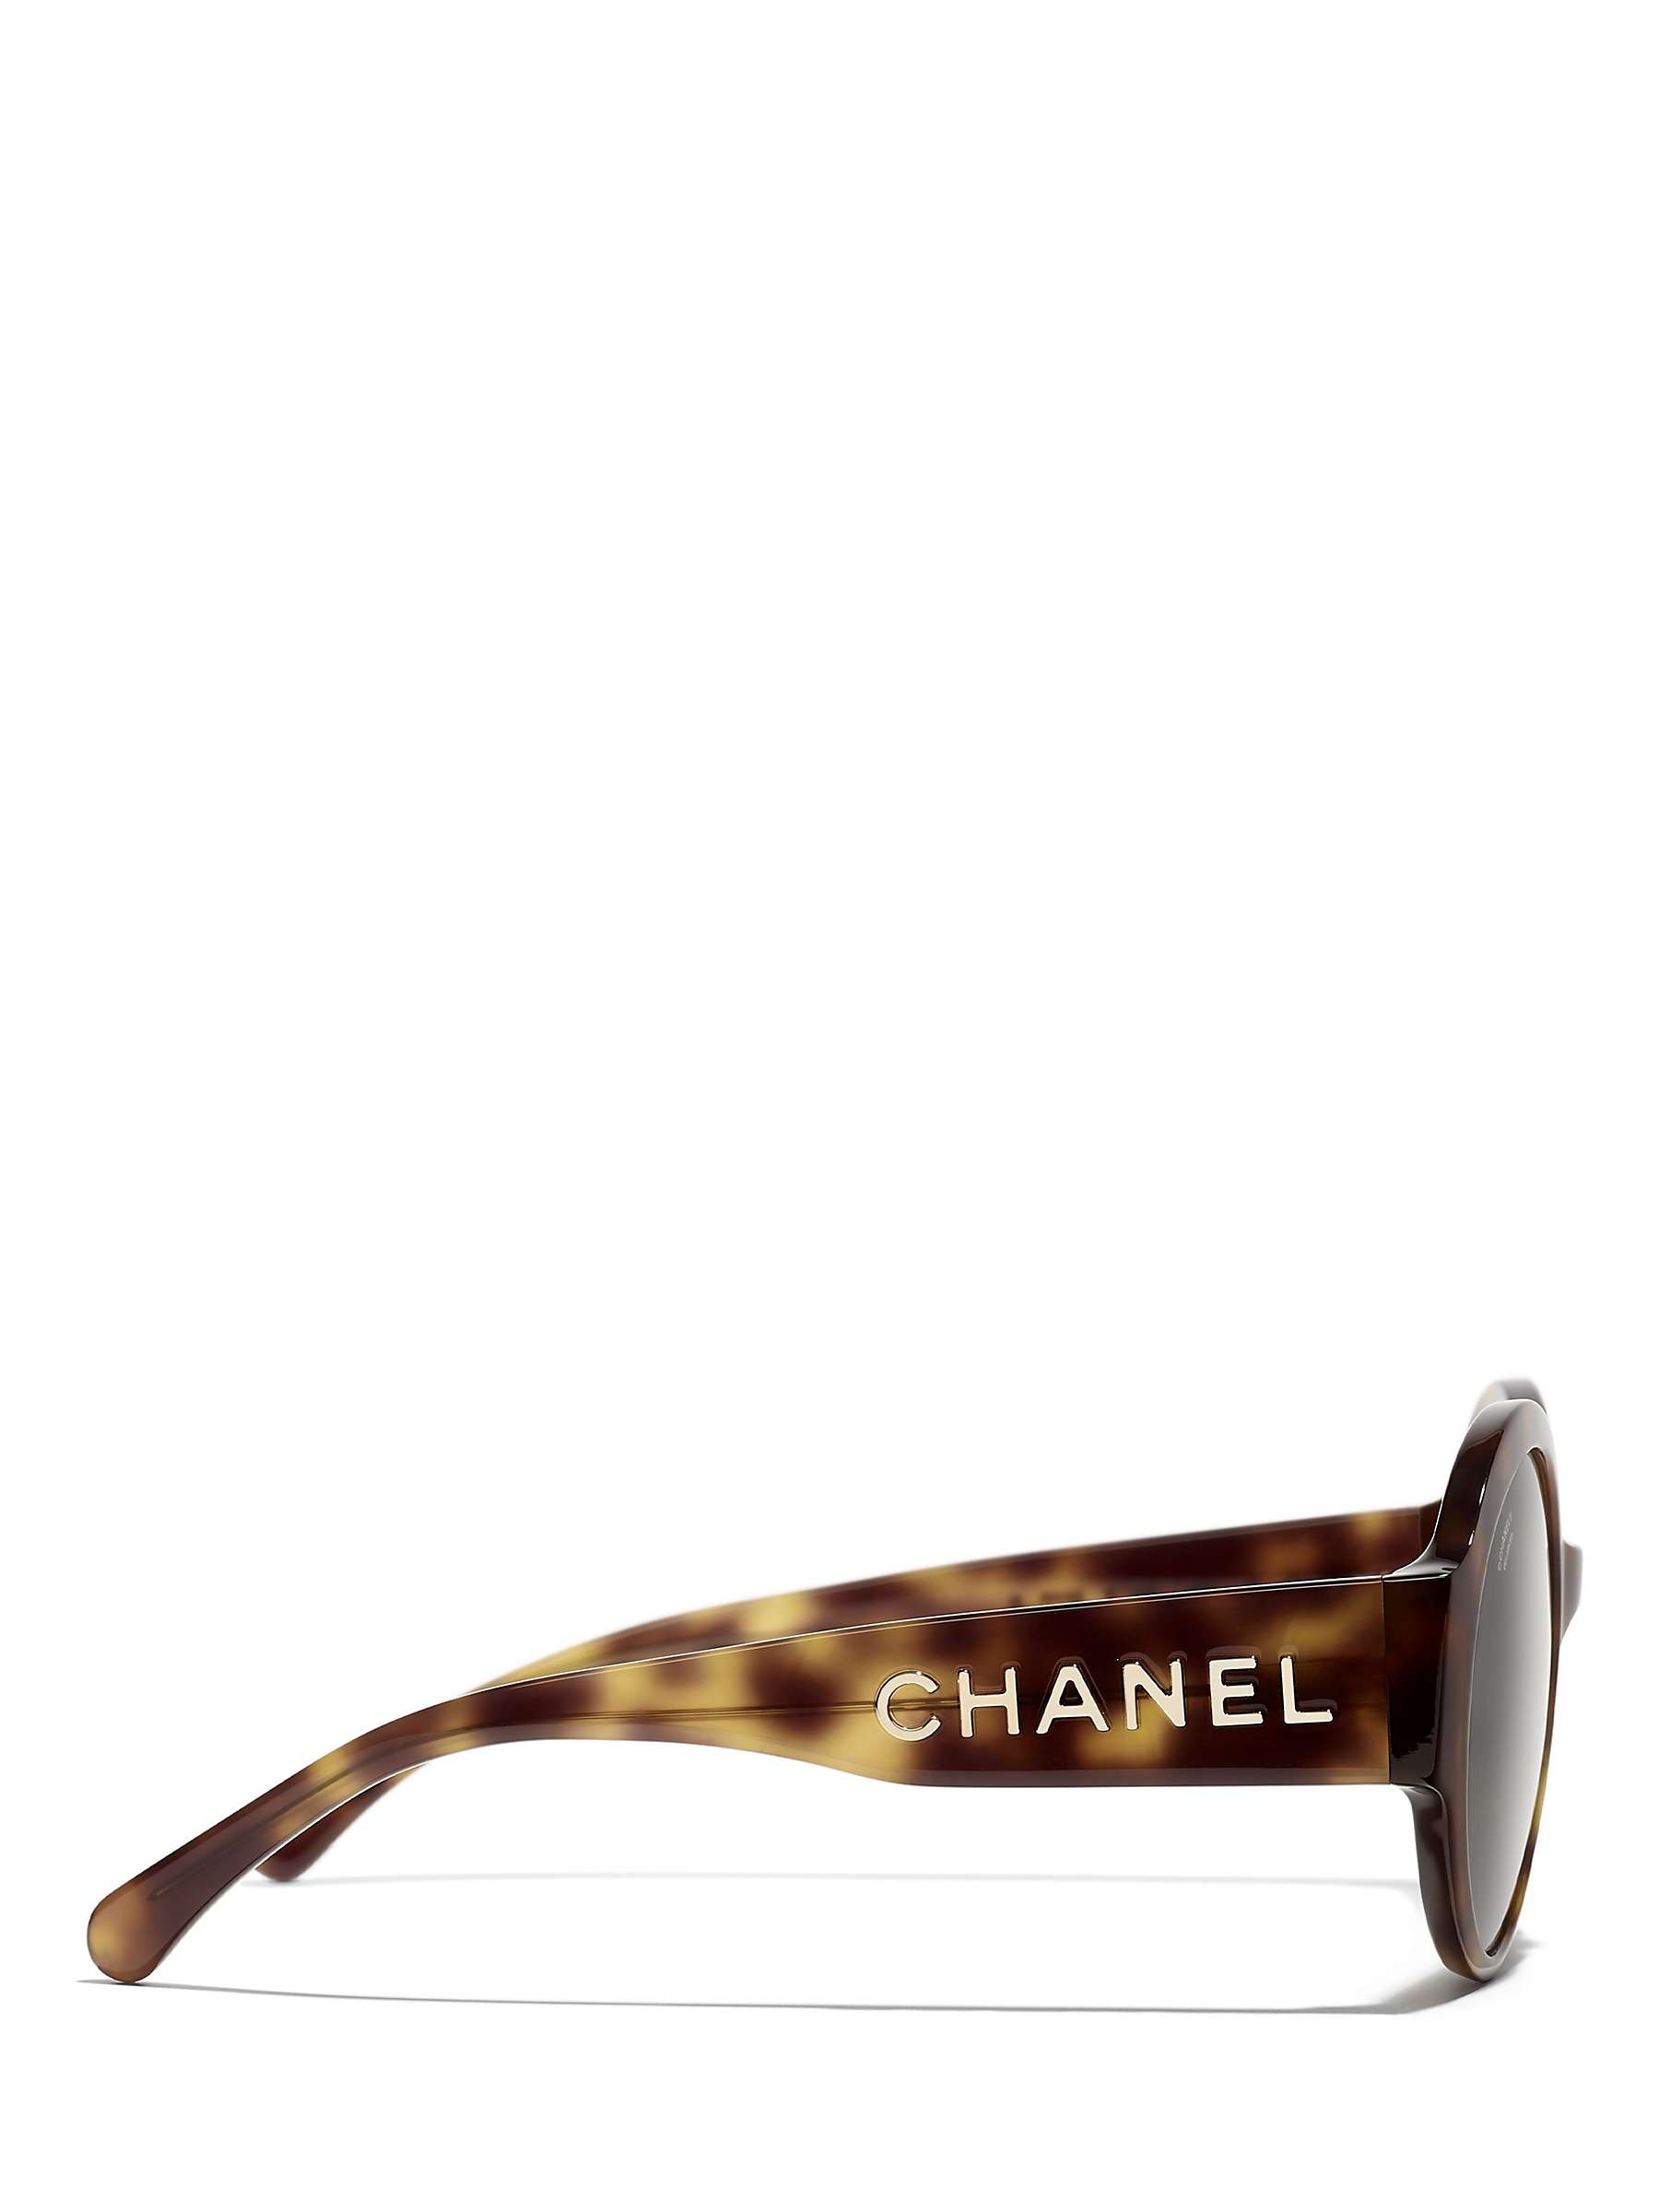 Buy CHANEL Oval Sunglasses CH5410 Havana/Brown Online at johnlewis.com